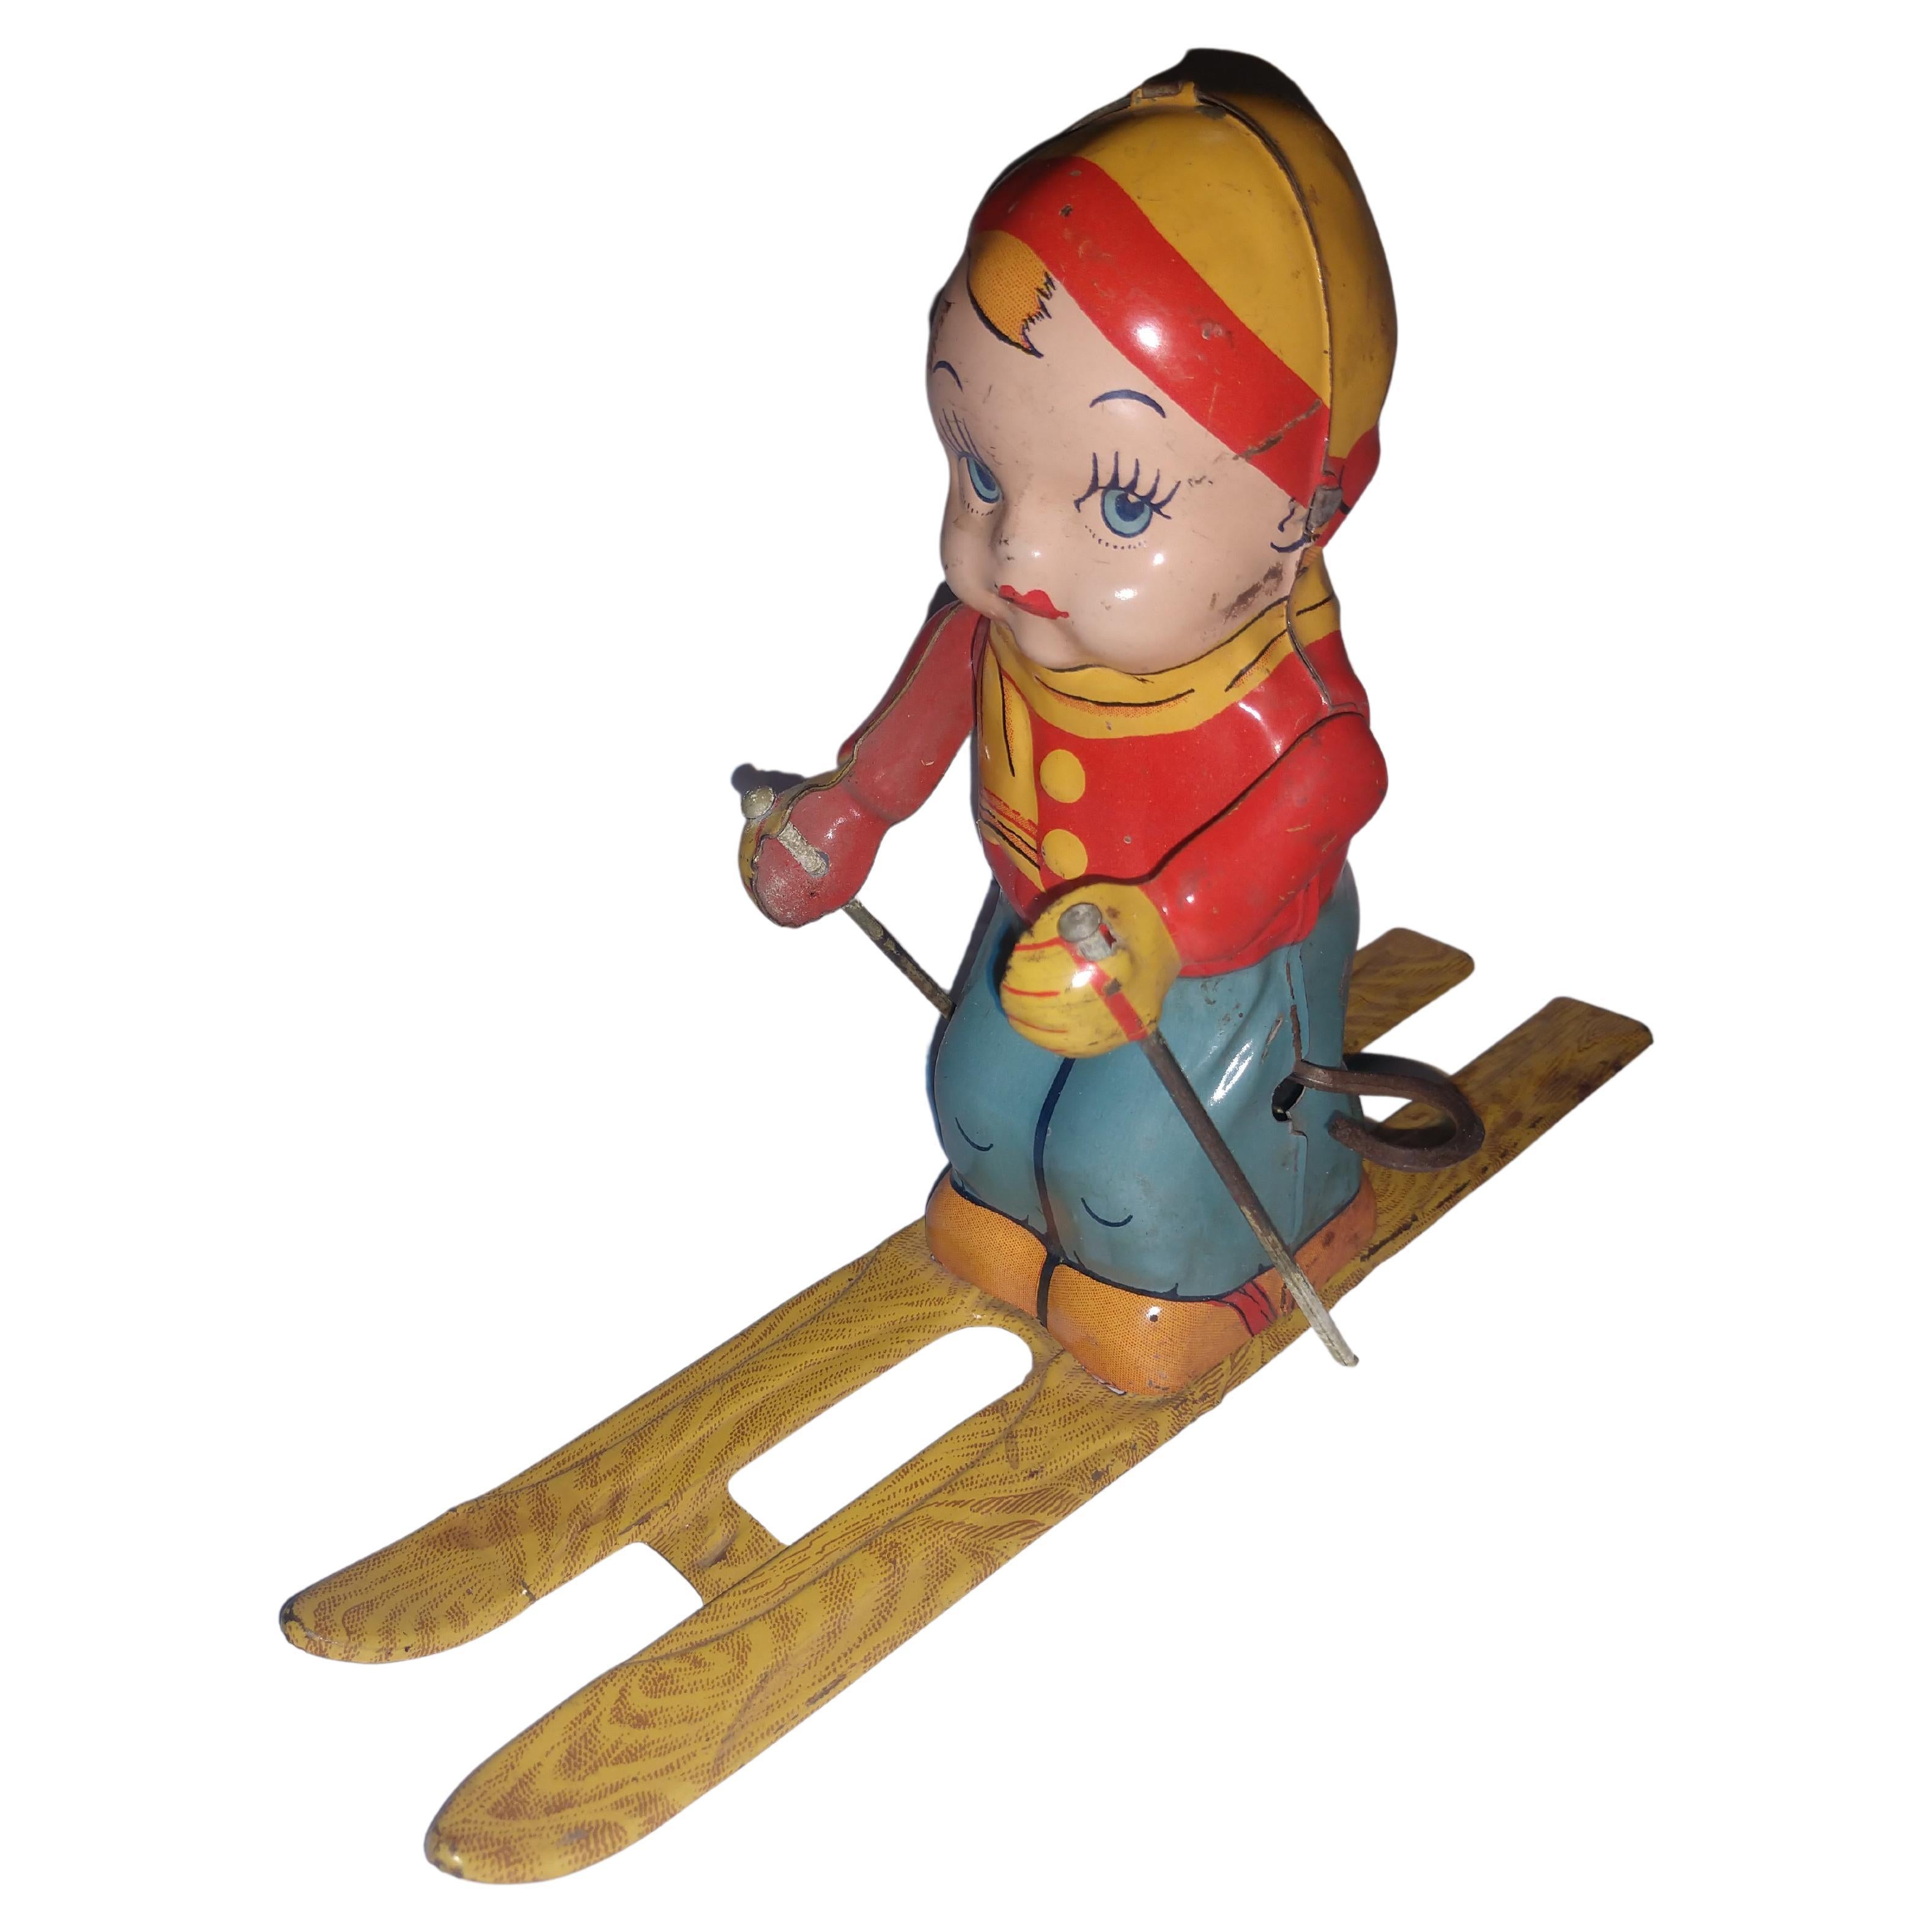 Mid Century Tin Litho Windup Toy Skier Girl by Chein C1945